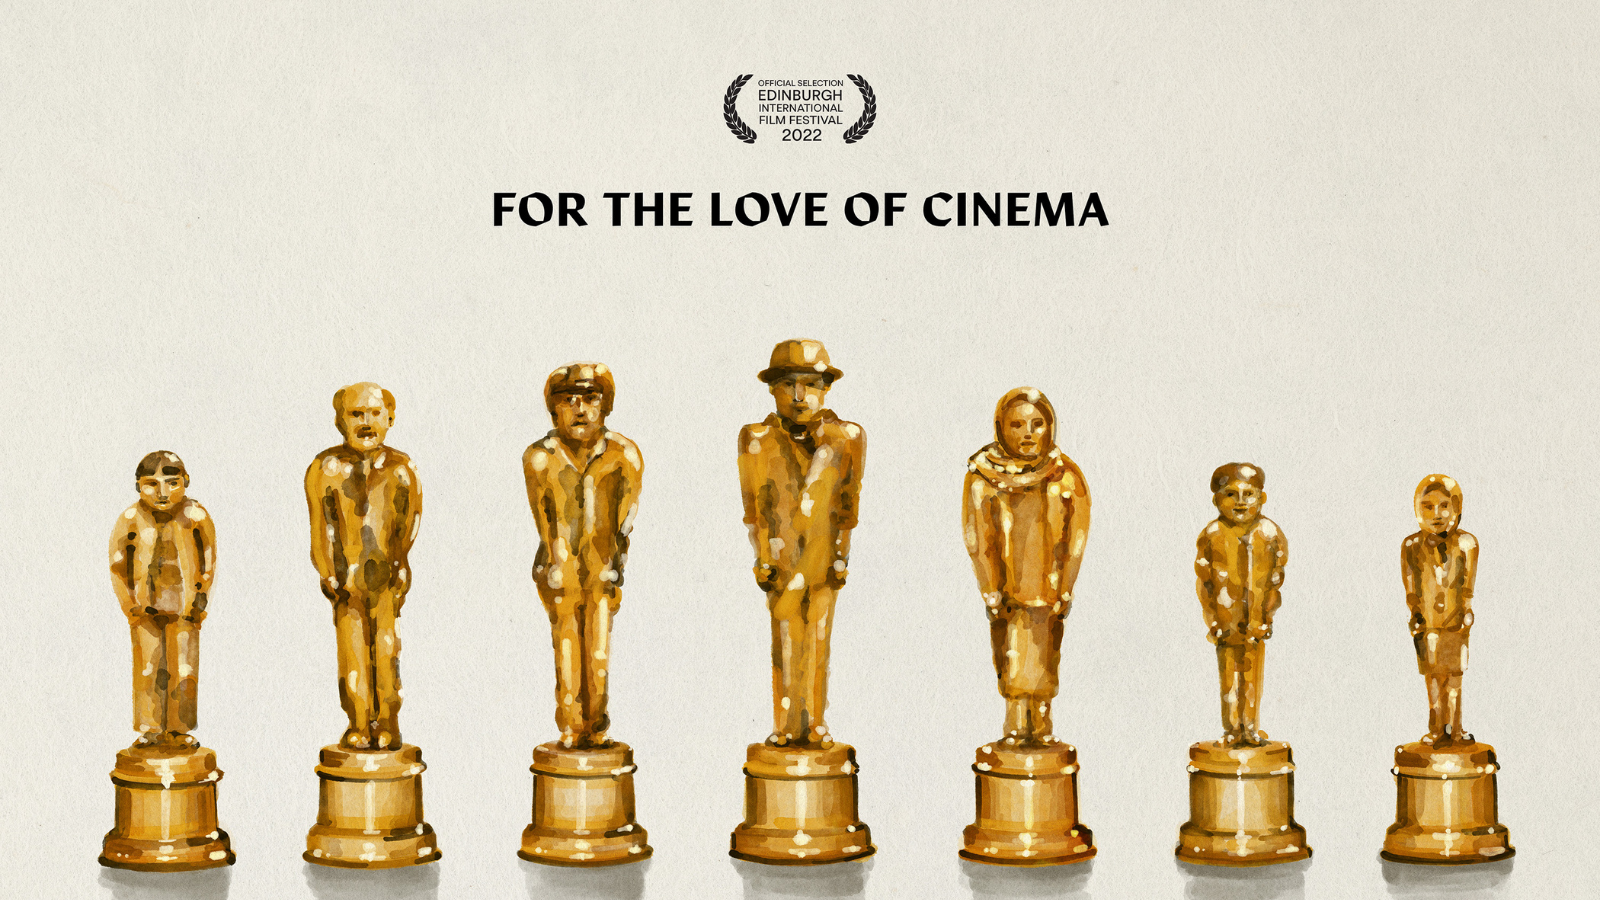 Figures in traditional dress depicted as gold statues. The text reads 'Official Selection Edinburgh International Film Festival 2022' and 'For the Love of Cinema'